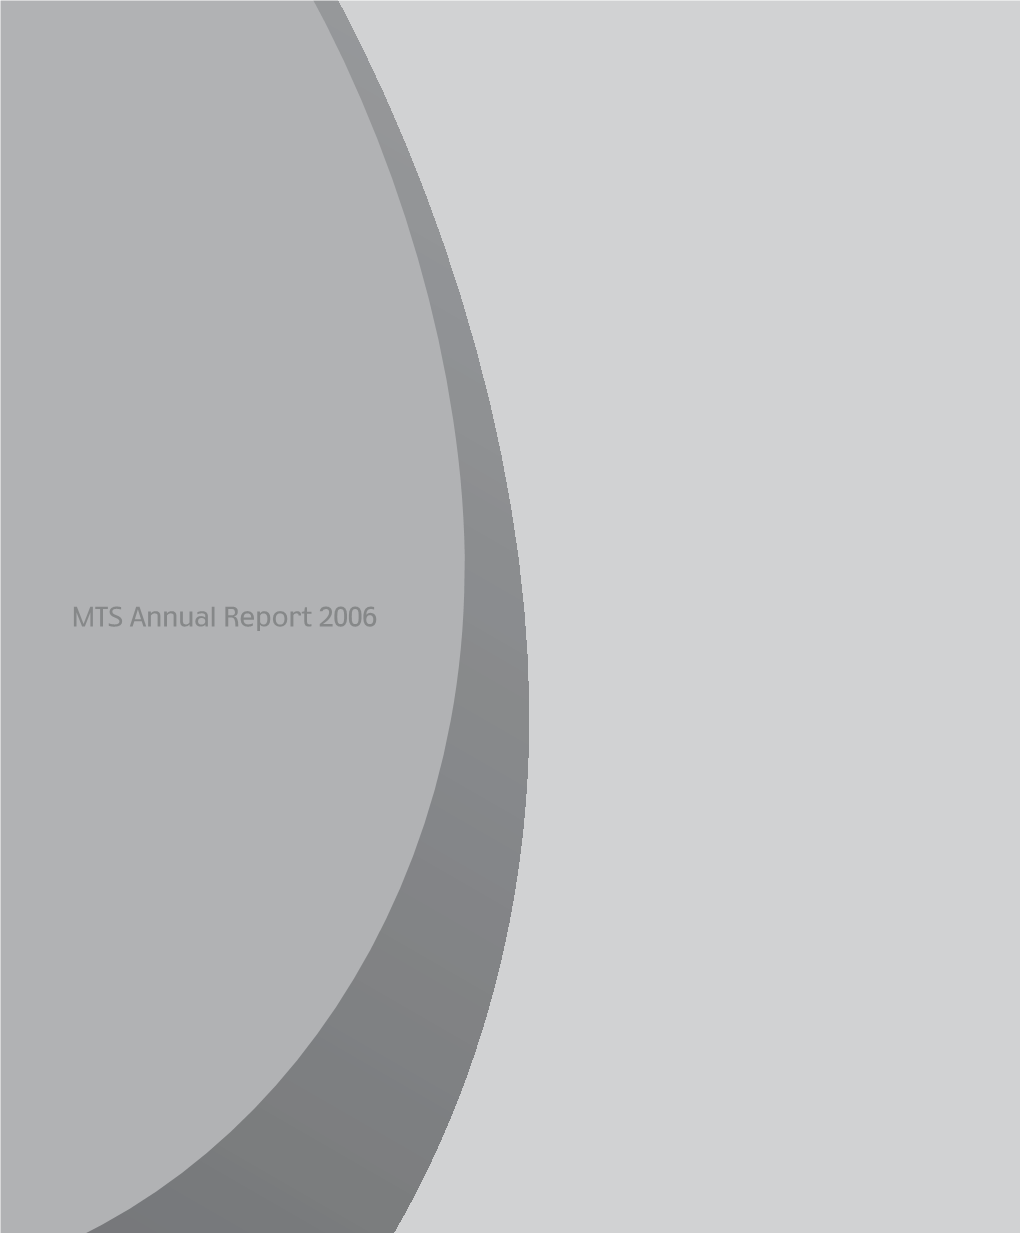 MTS Annual Report 2006 MTS’ Profile 8